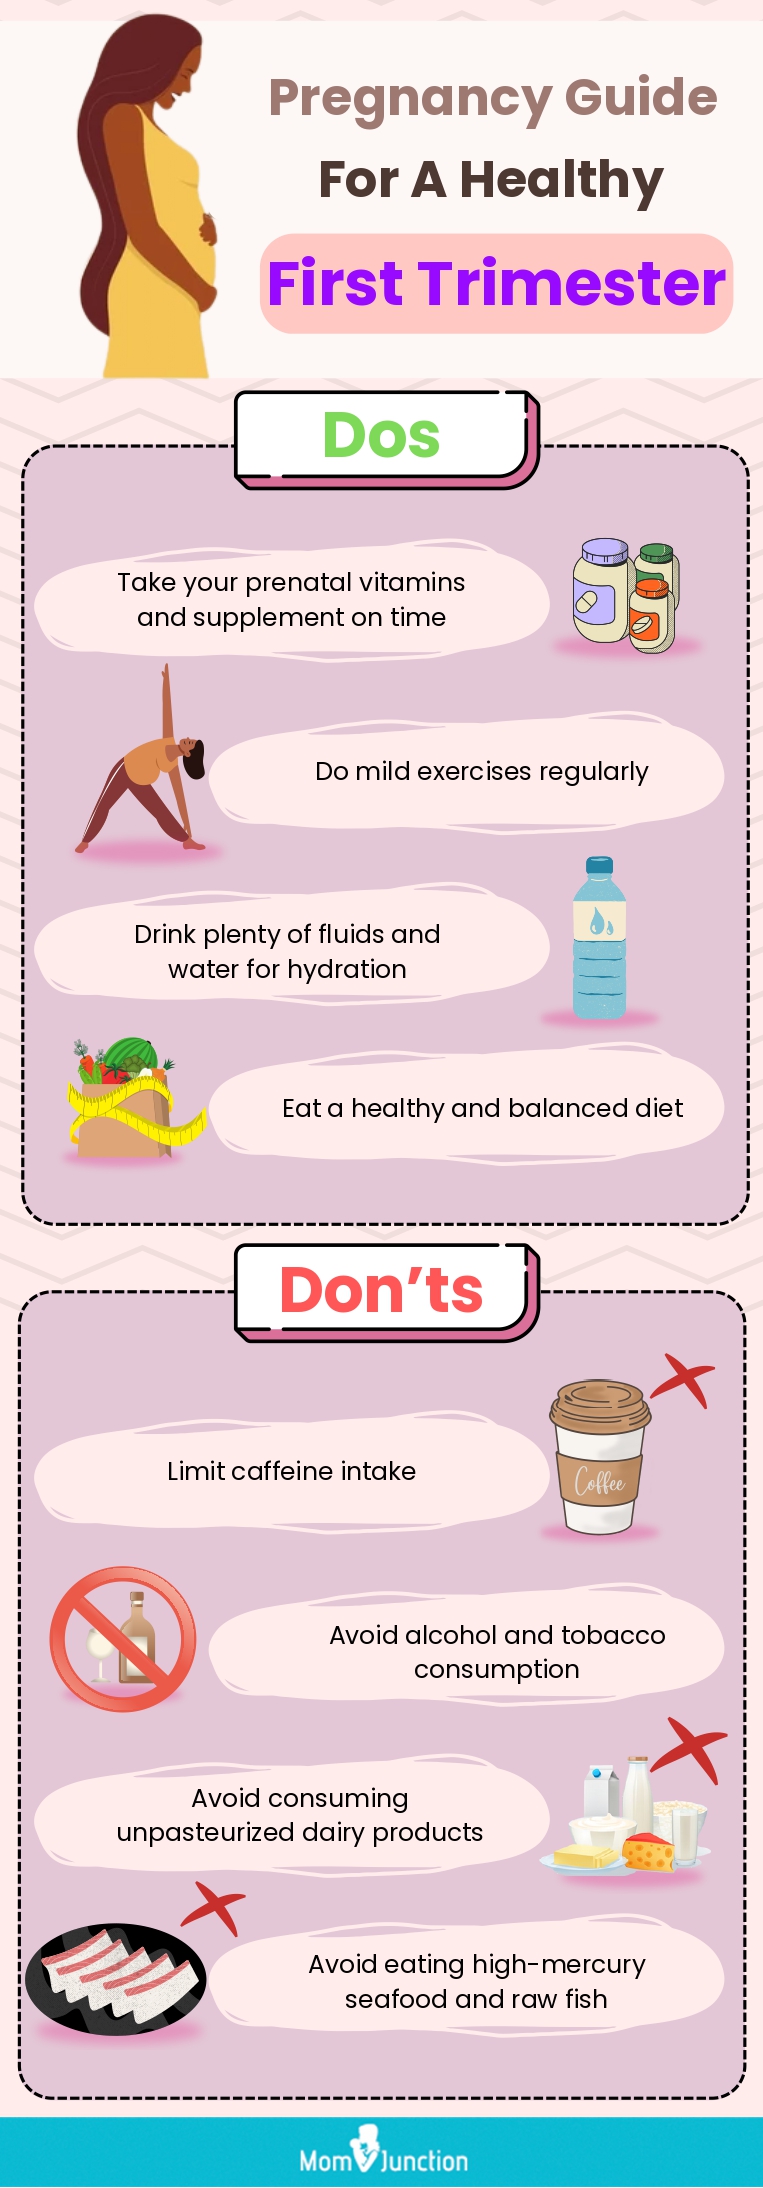 pregnancy guide for a healthy first trimester (infographic)